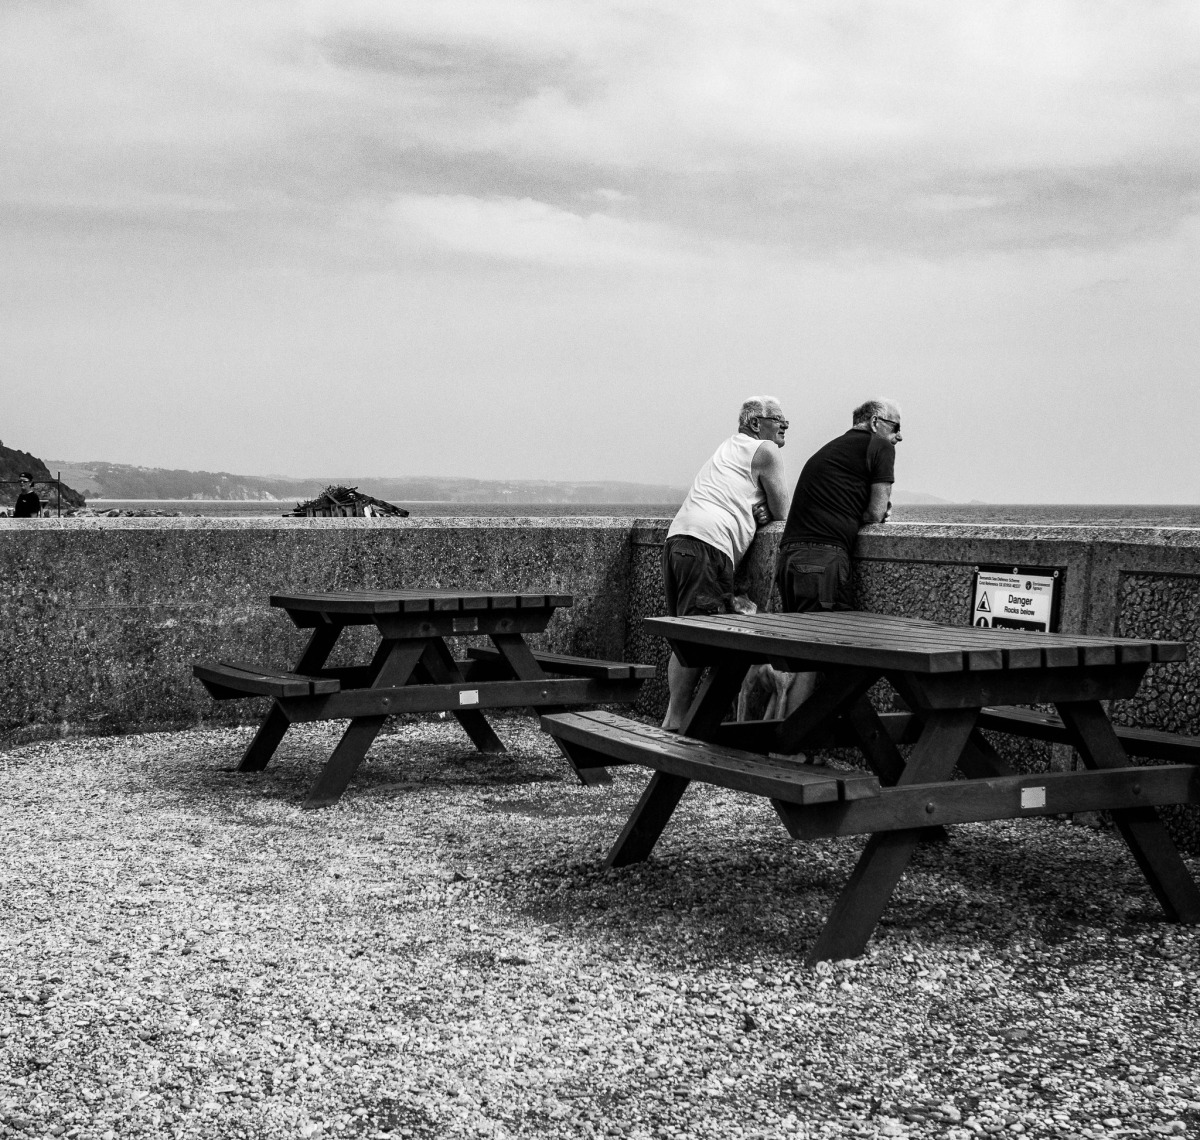 Beesands in black and white